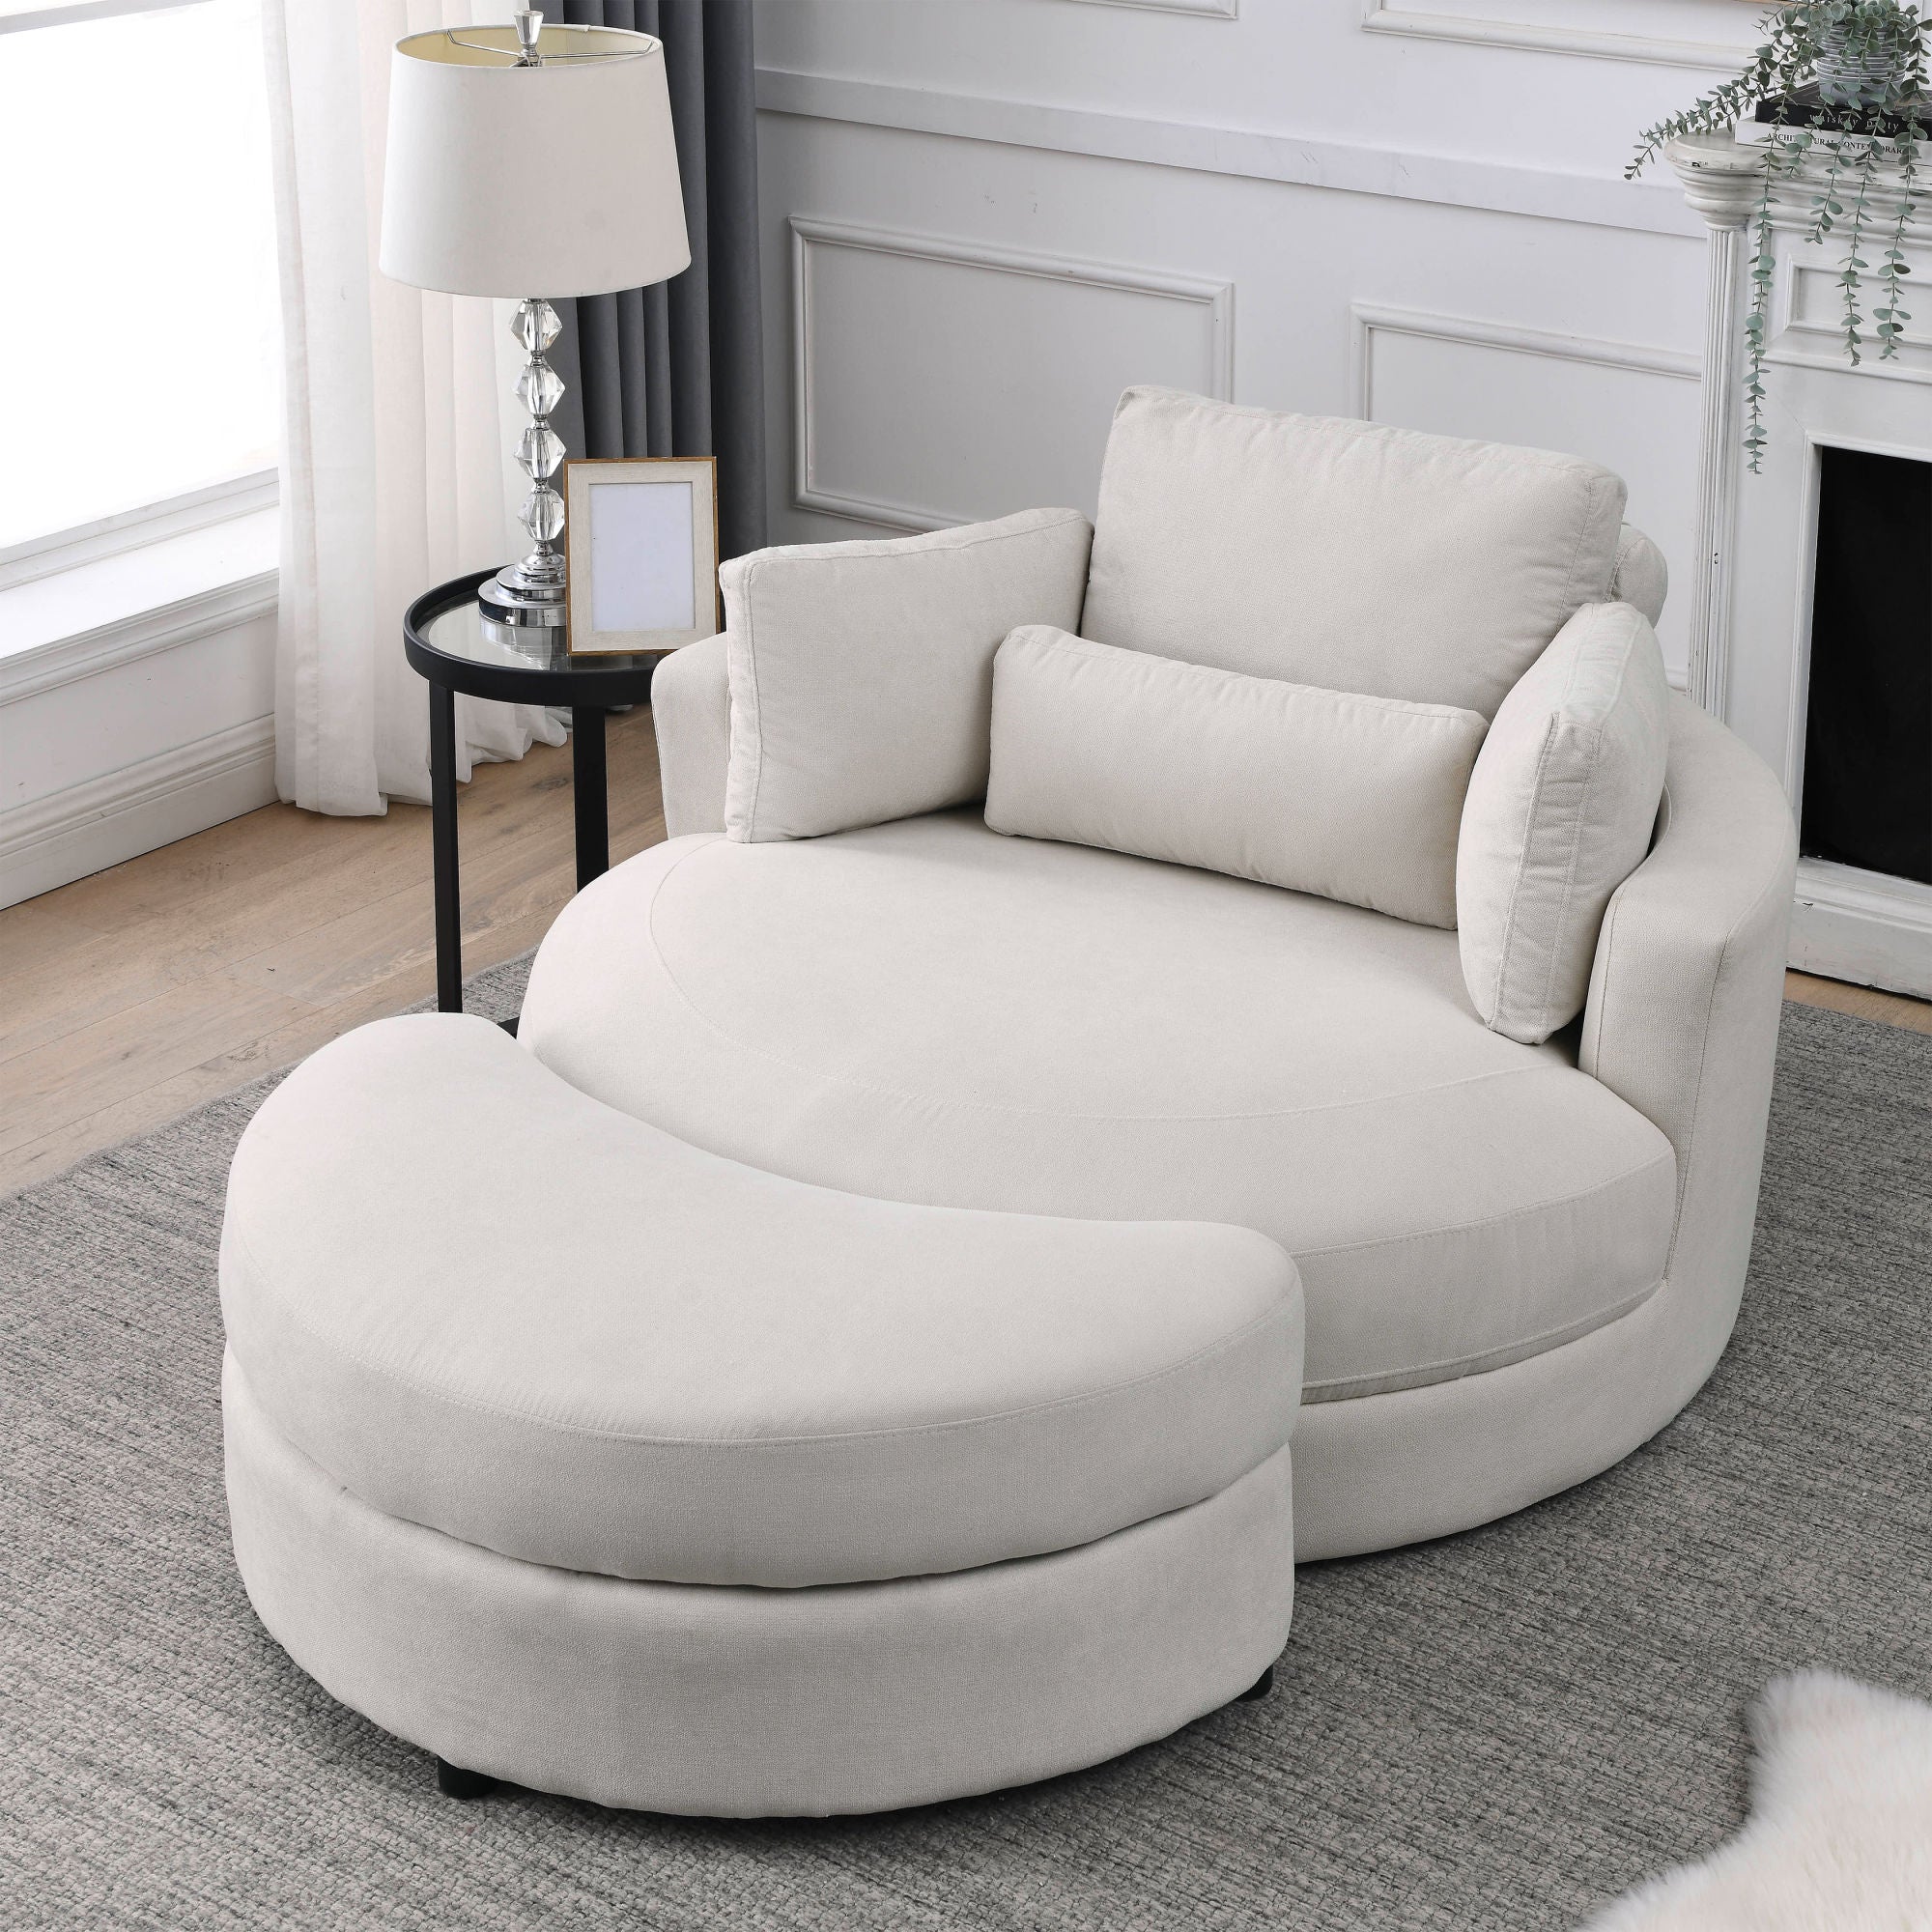 Welike Cocooning Chair